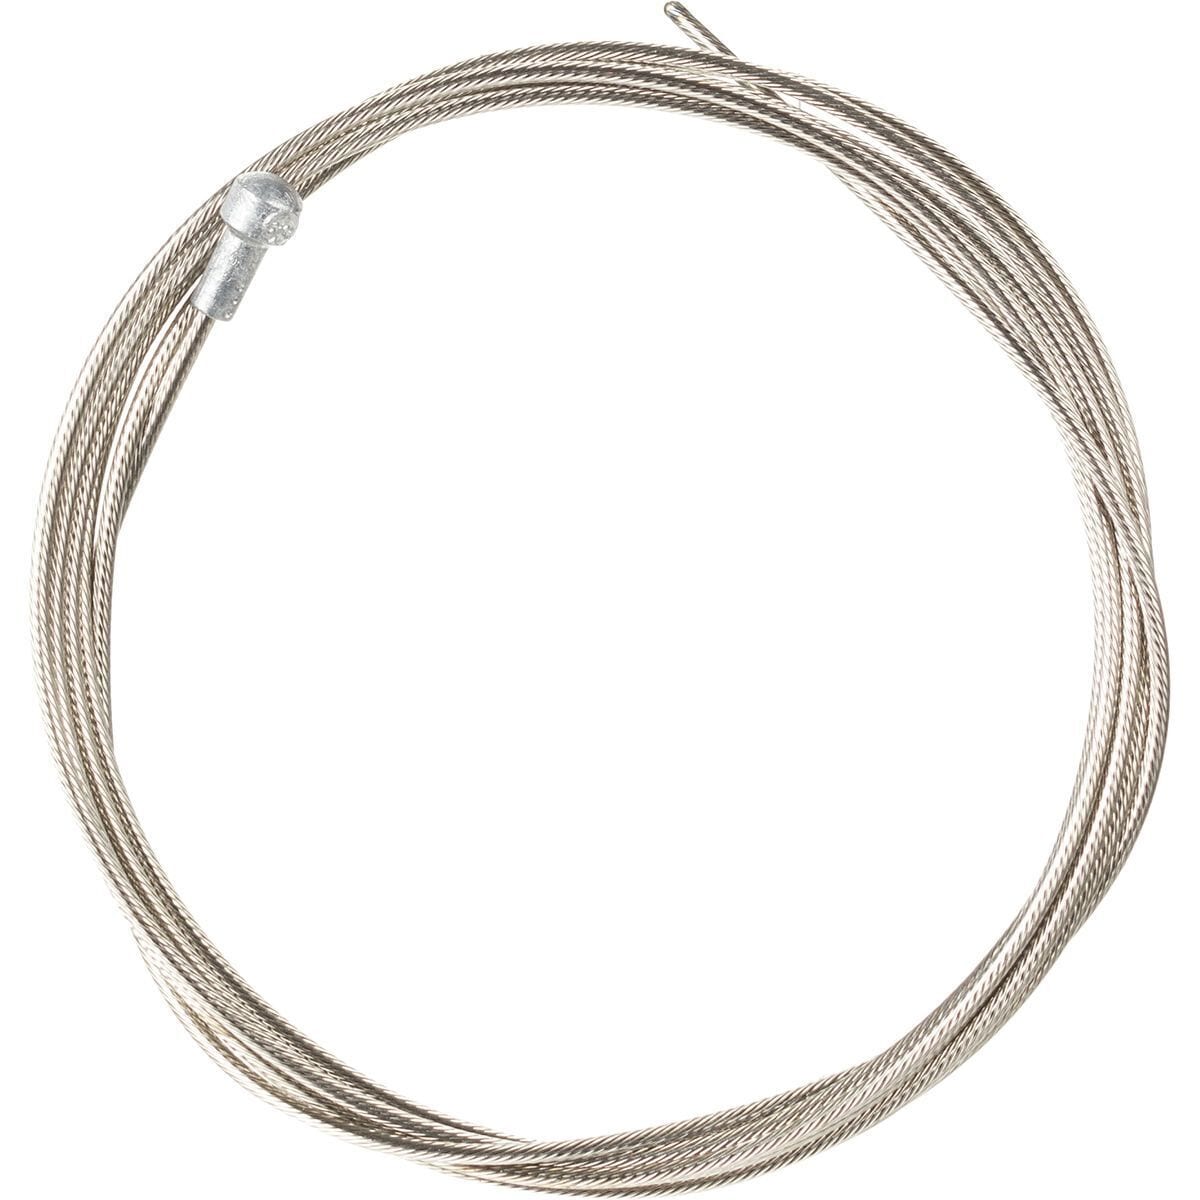 Jagwire Road Pro Polished Slick Stainless Brake Cable Campagnolo, 2000mm